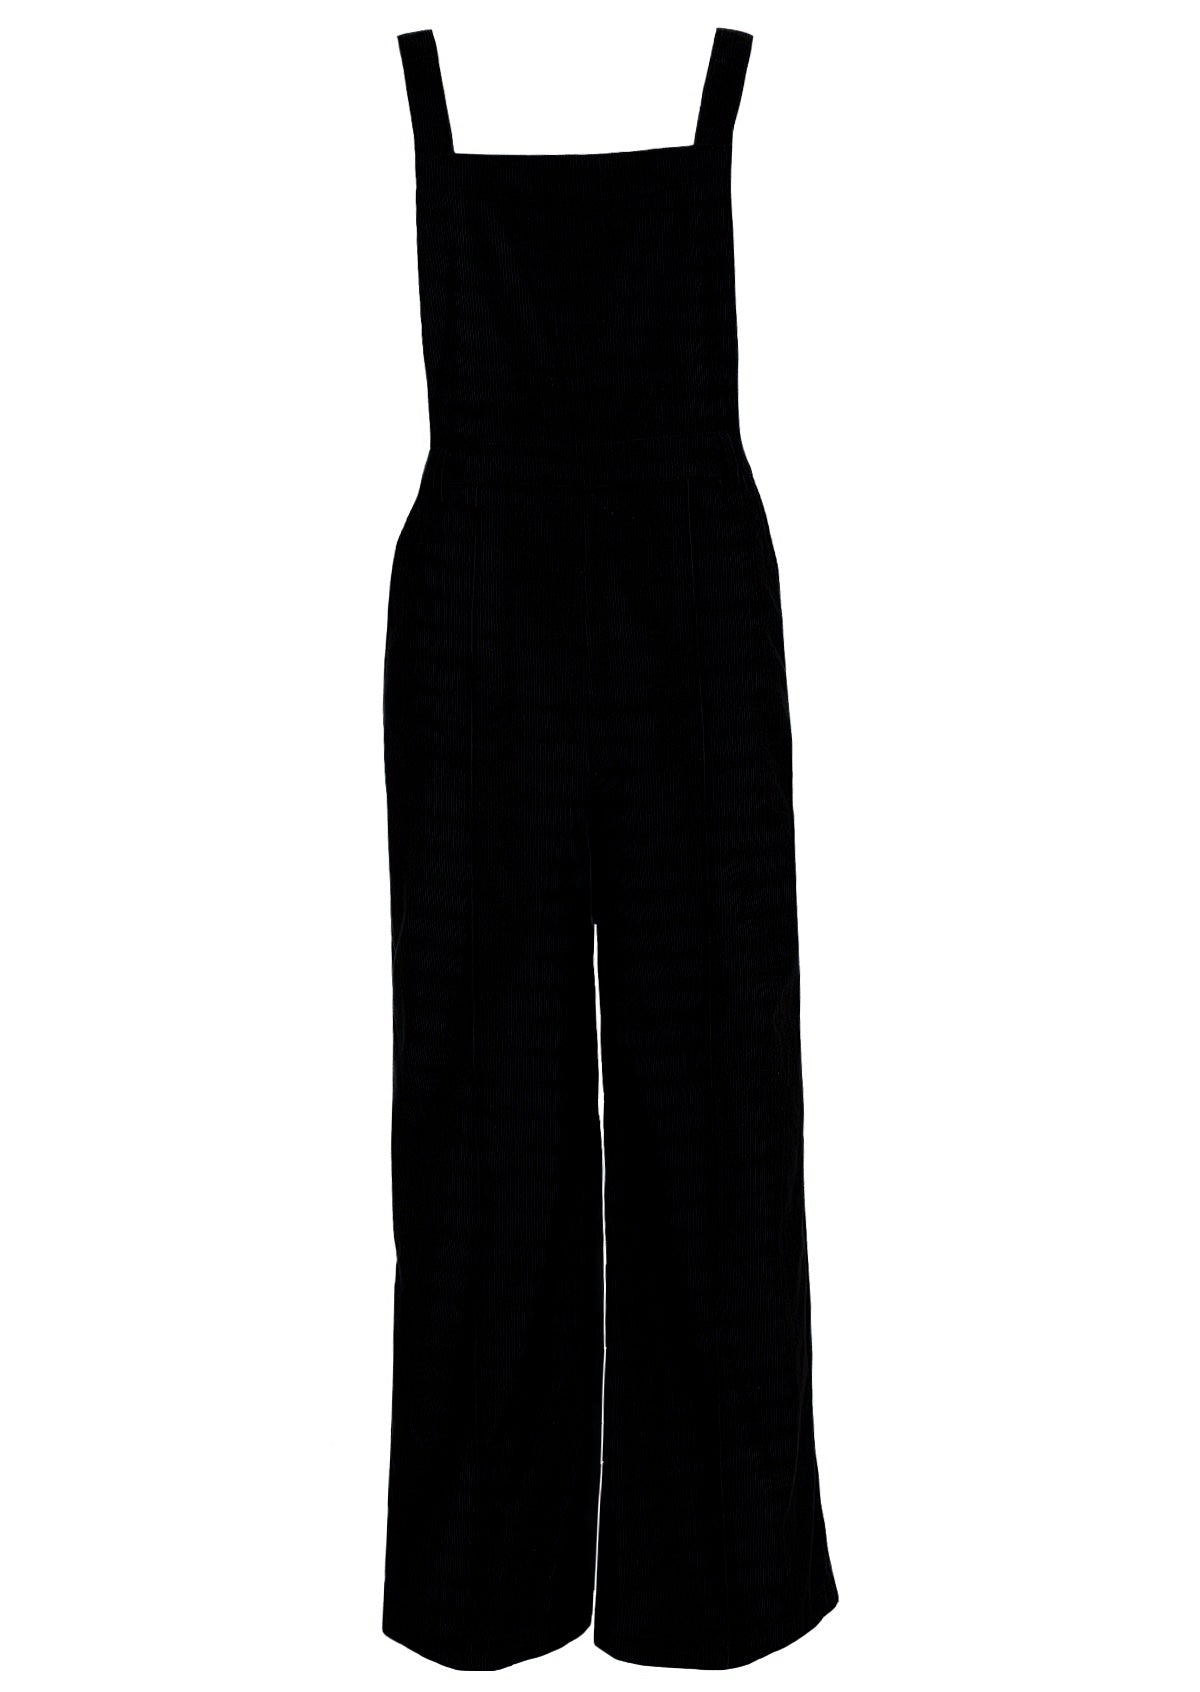 front view of black cotton corduroy overalls